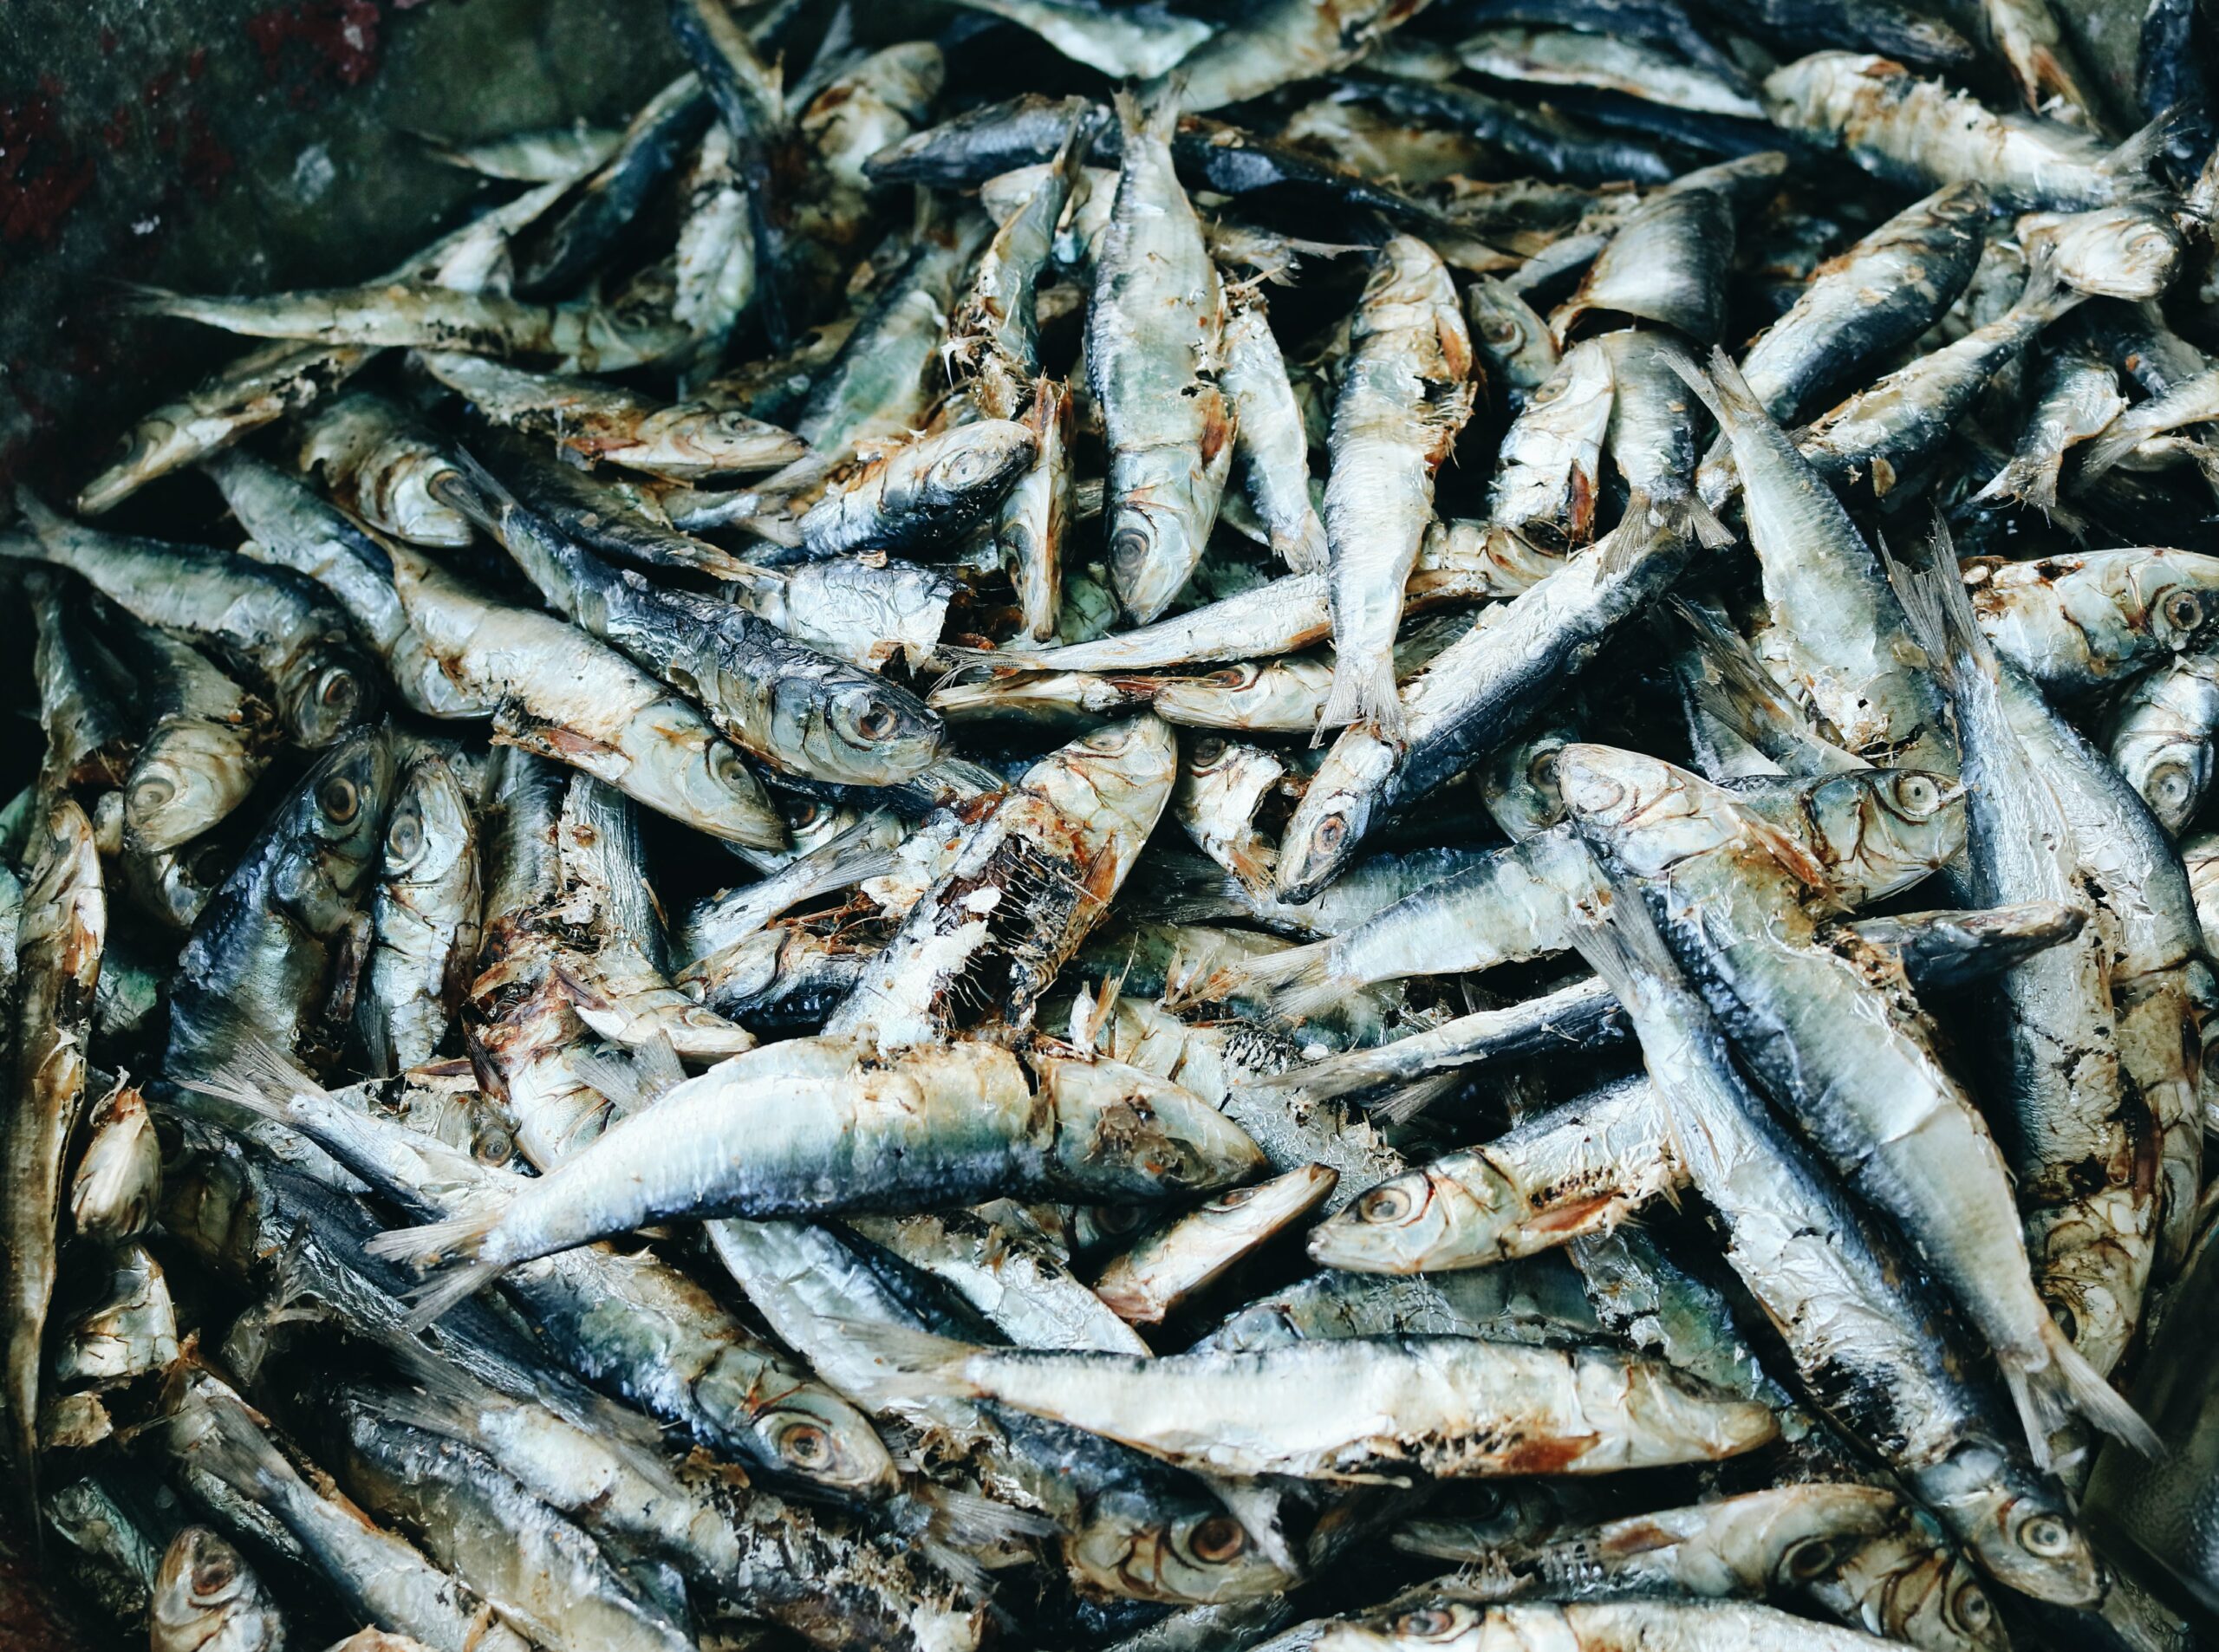 Birds-eye view of a pile of dried fish